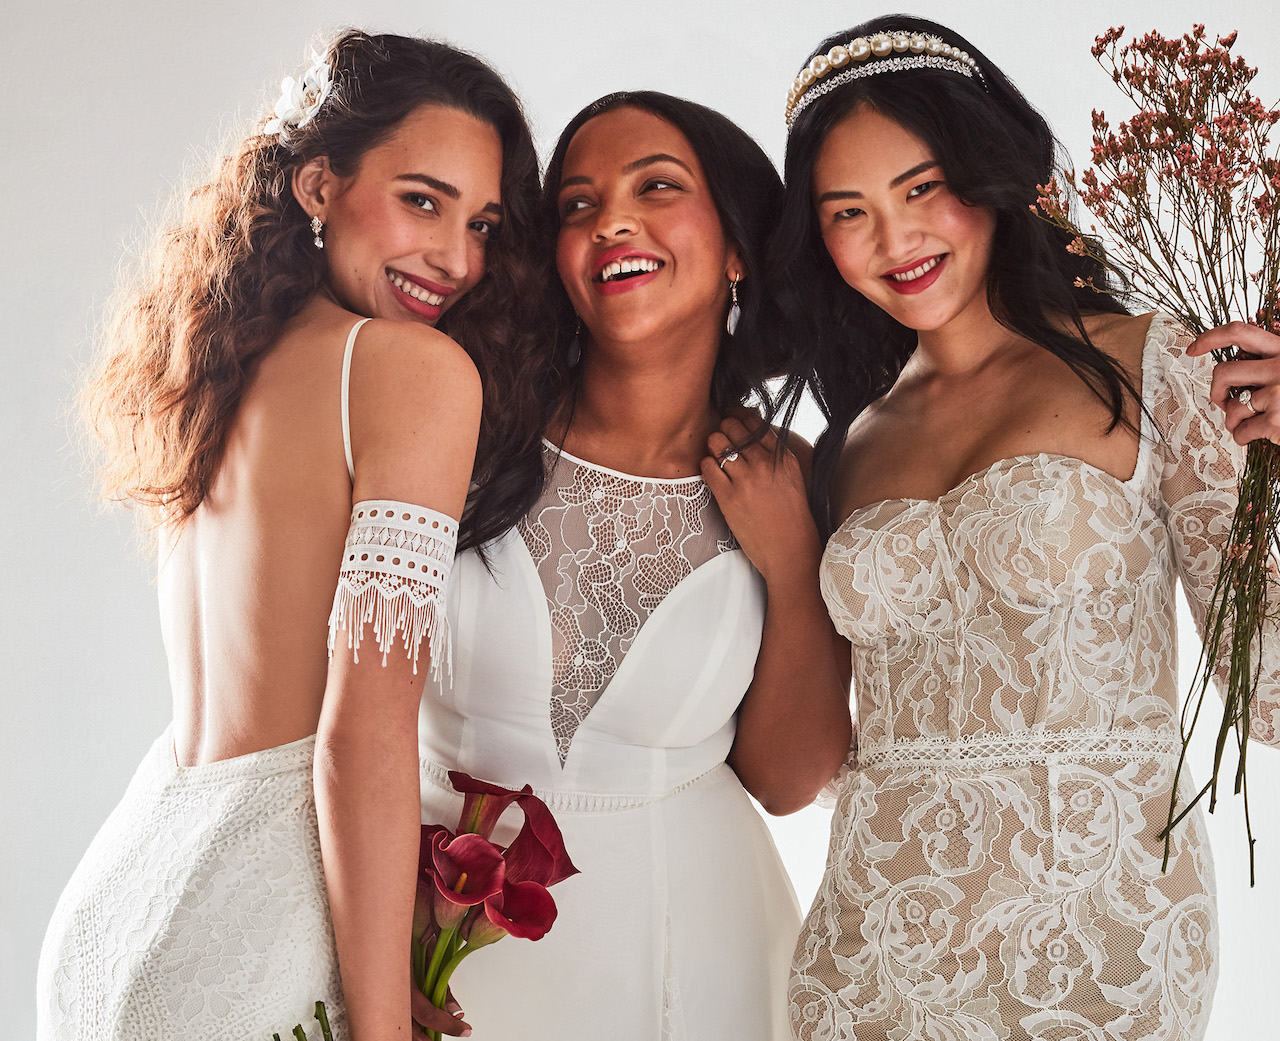 How David's Bridal plans to integrate startup Anomalie into its